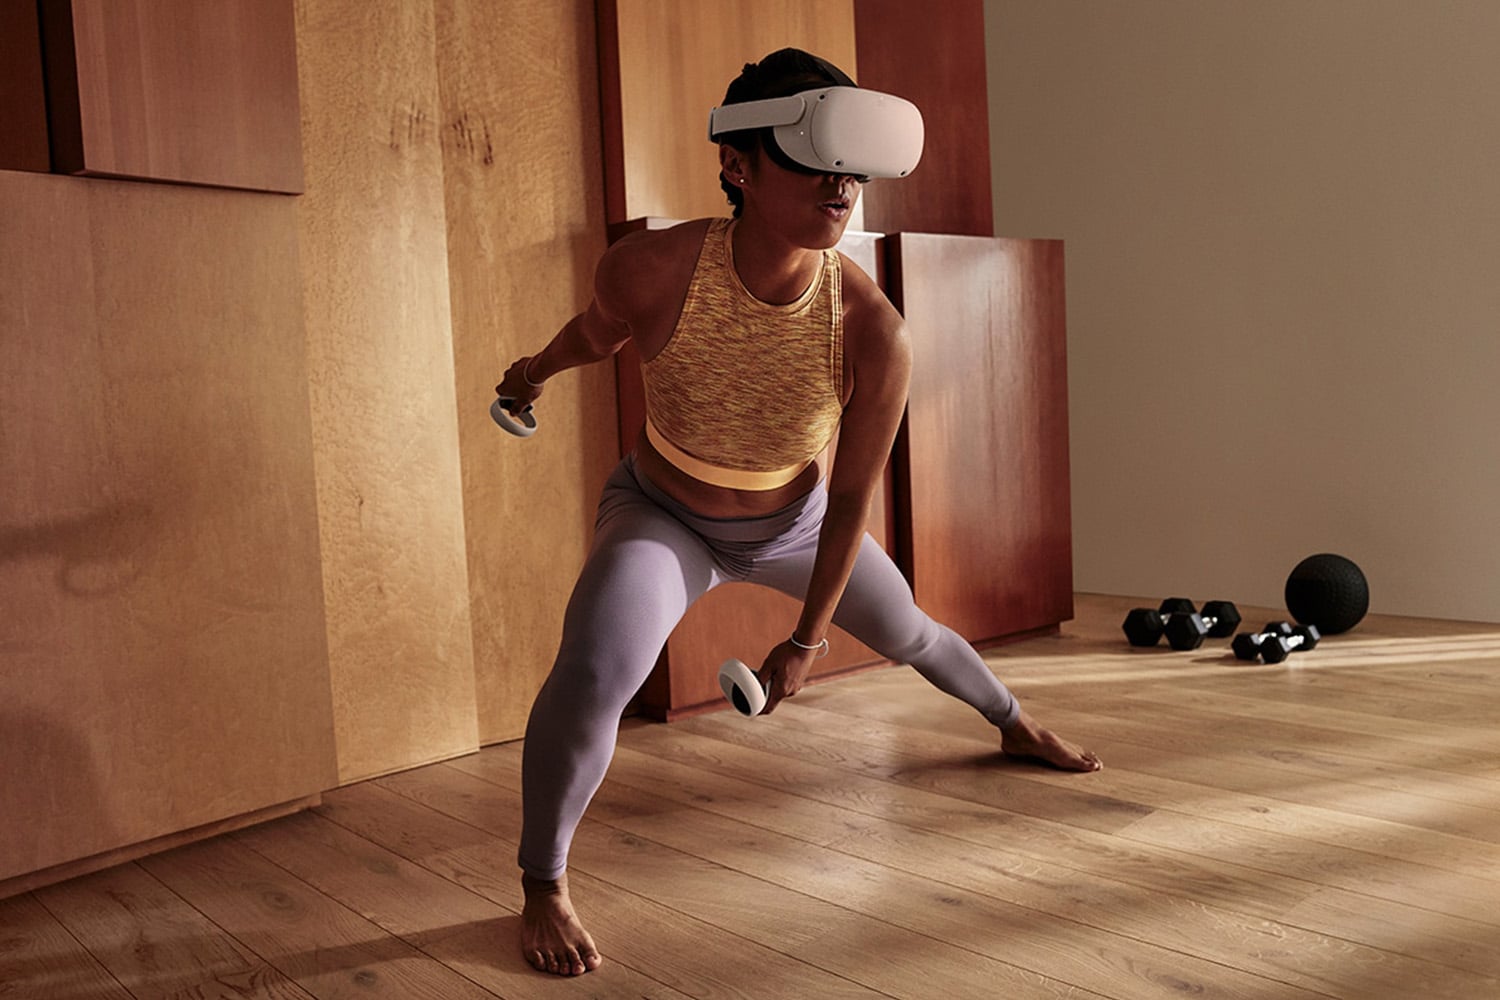 Woman wears Meta Quest headset while working out to have virtual reality exercise session